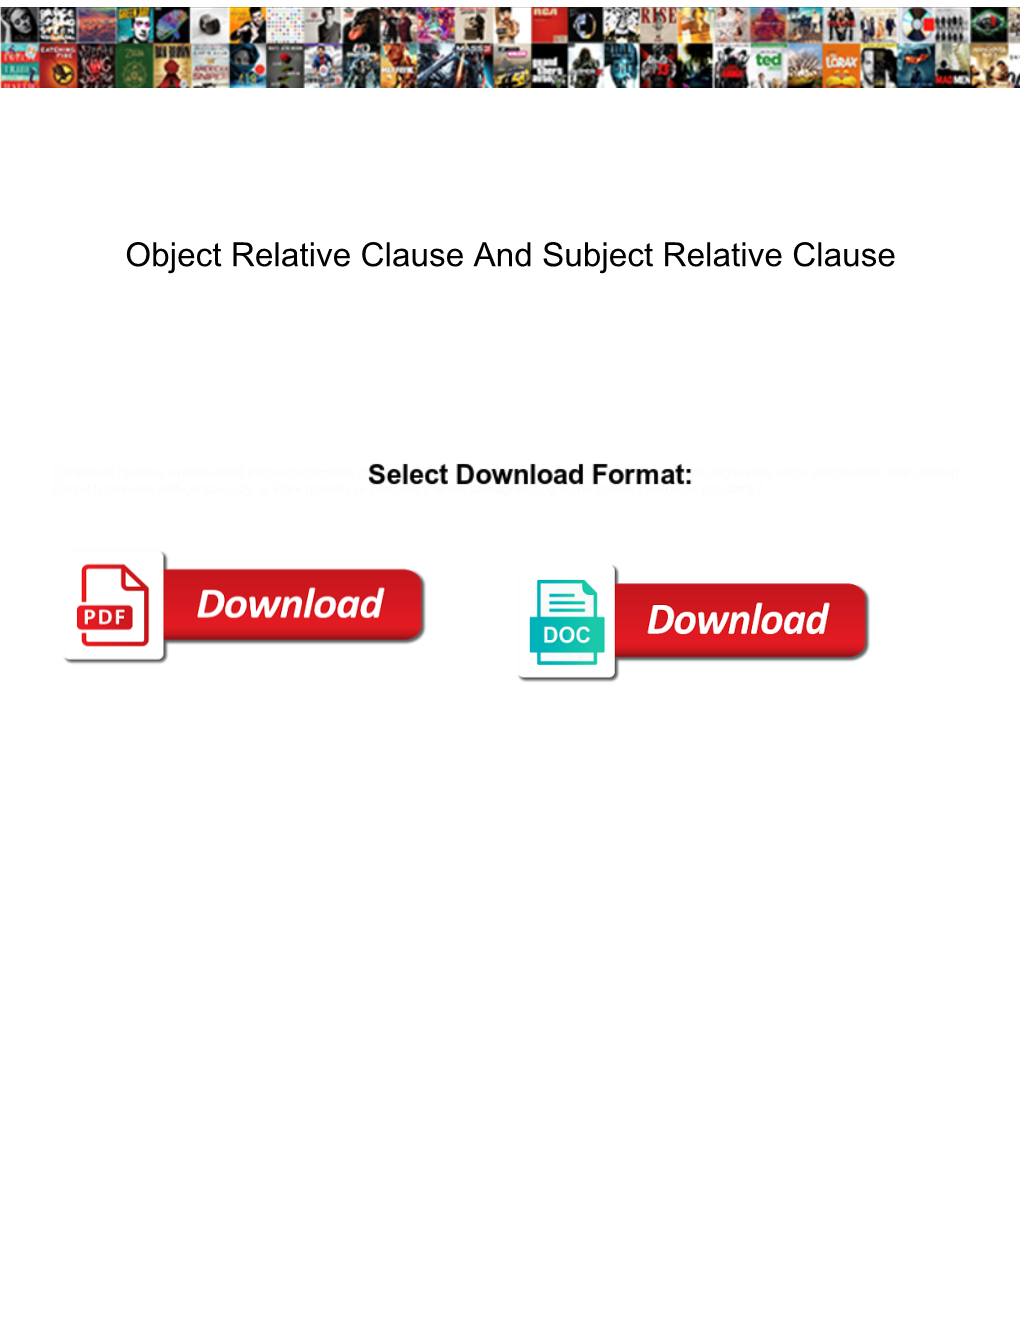 Object Relative Clause and Subject Relative Clause